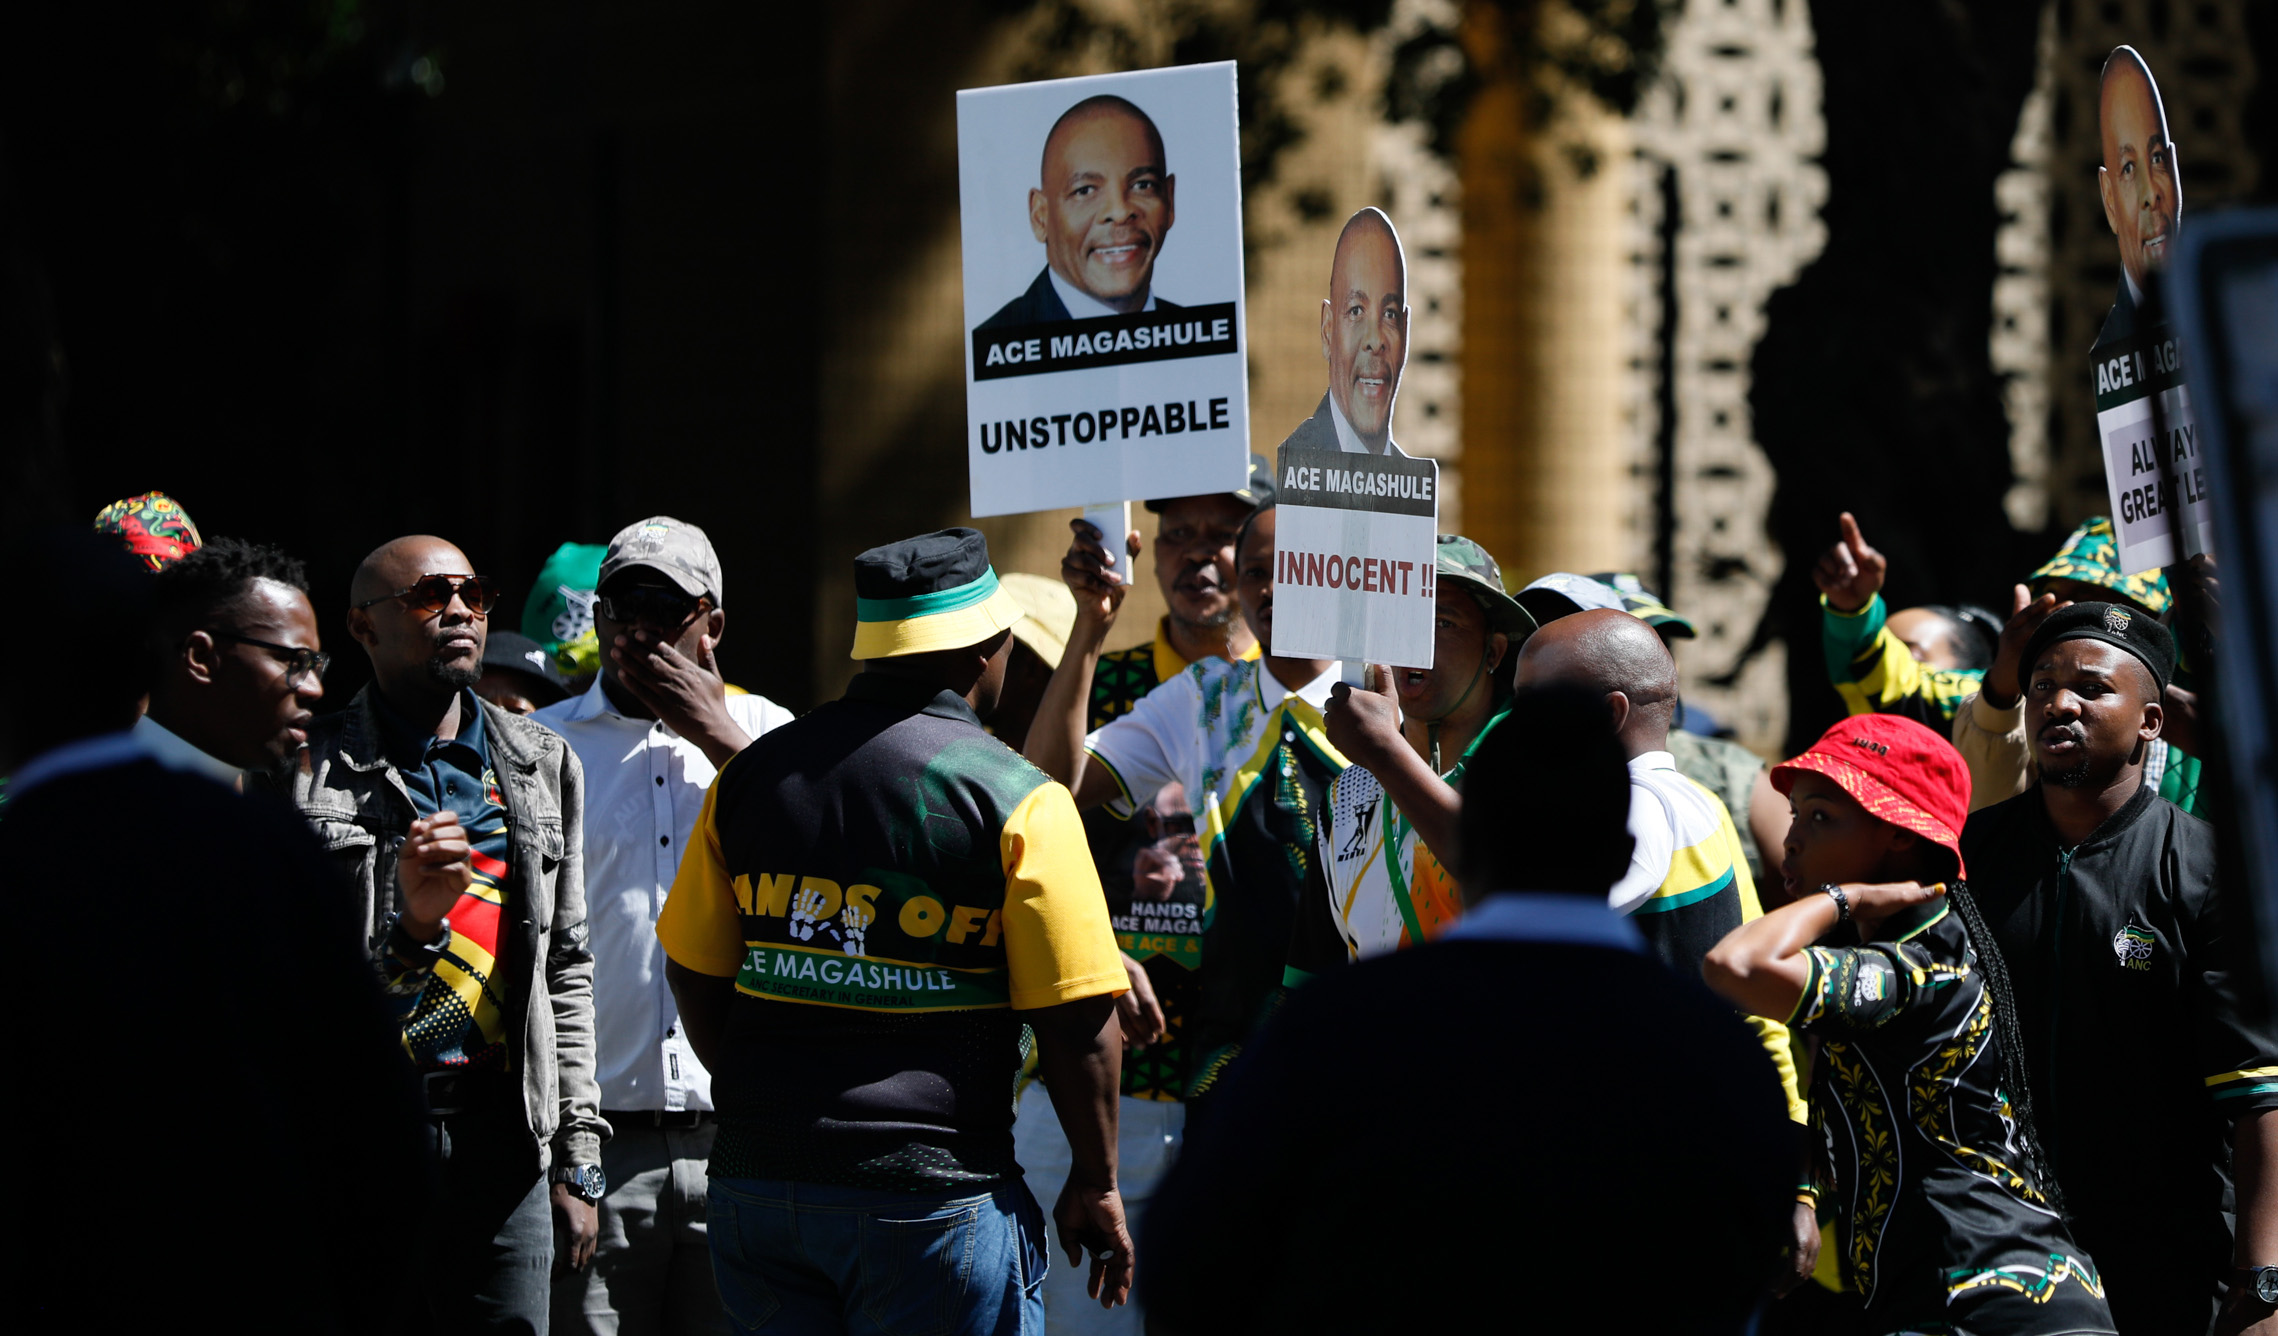 Supporters of Ace Magashule